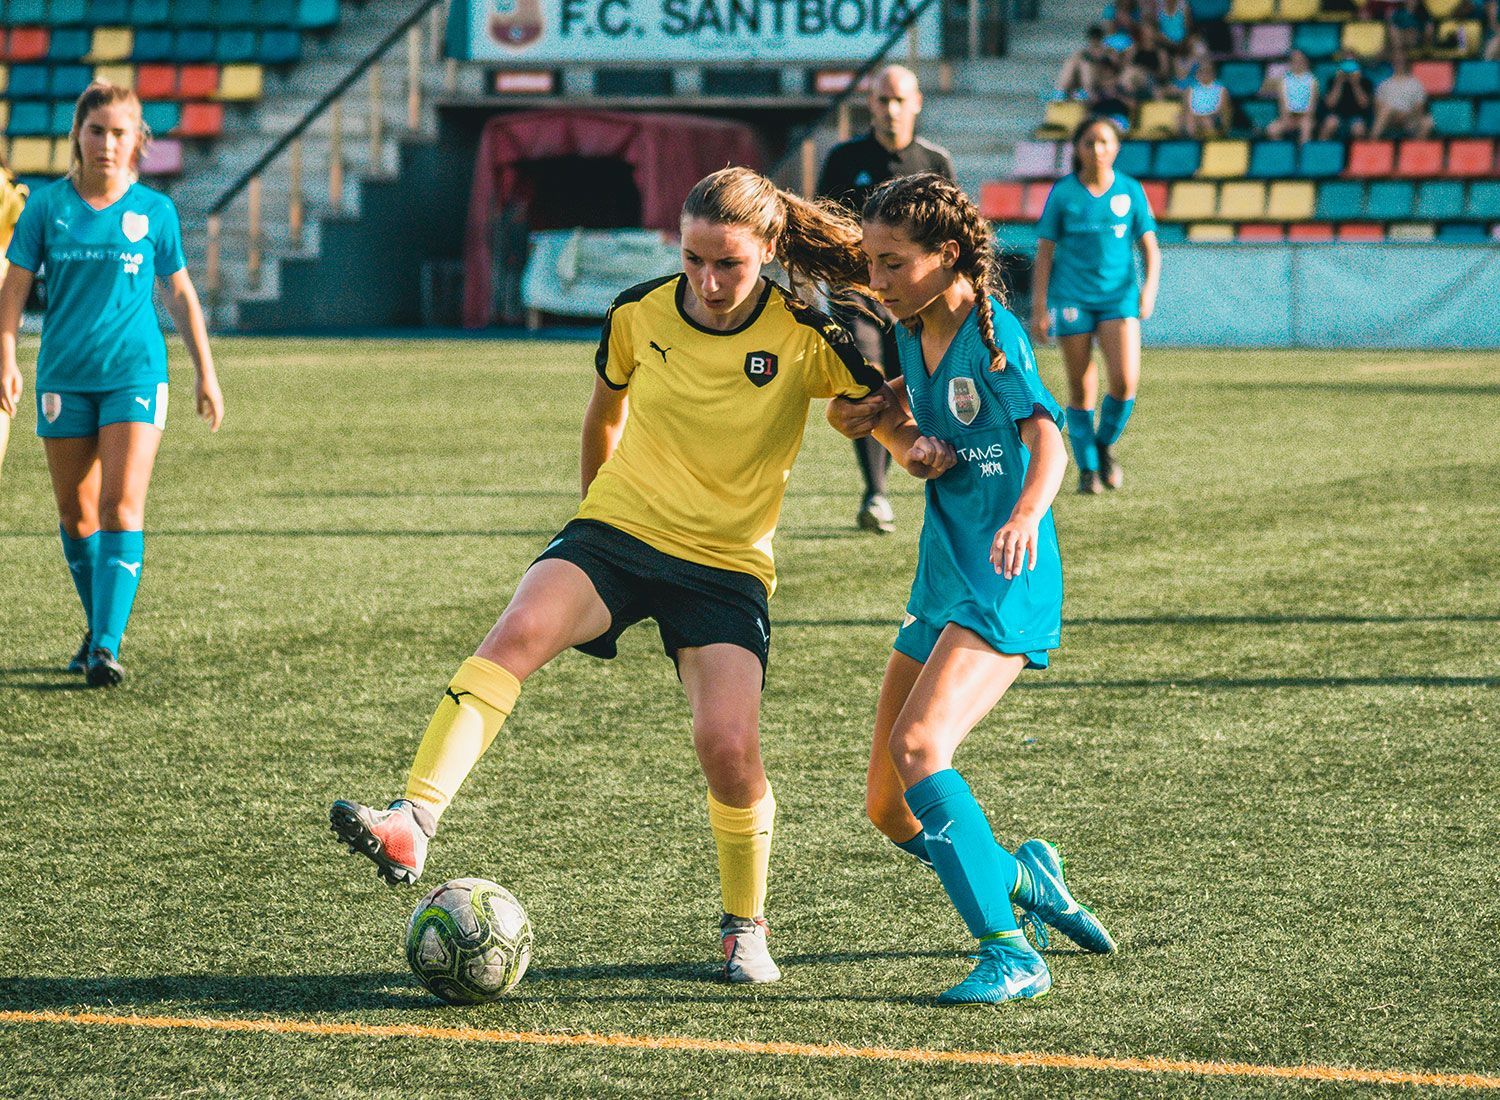 Tips to become a pro women’s soccer player